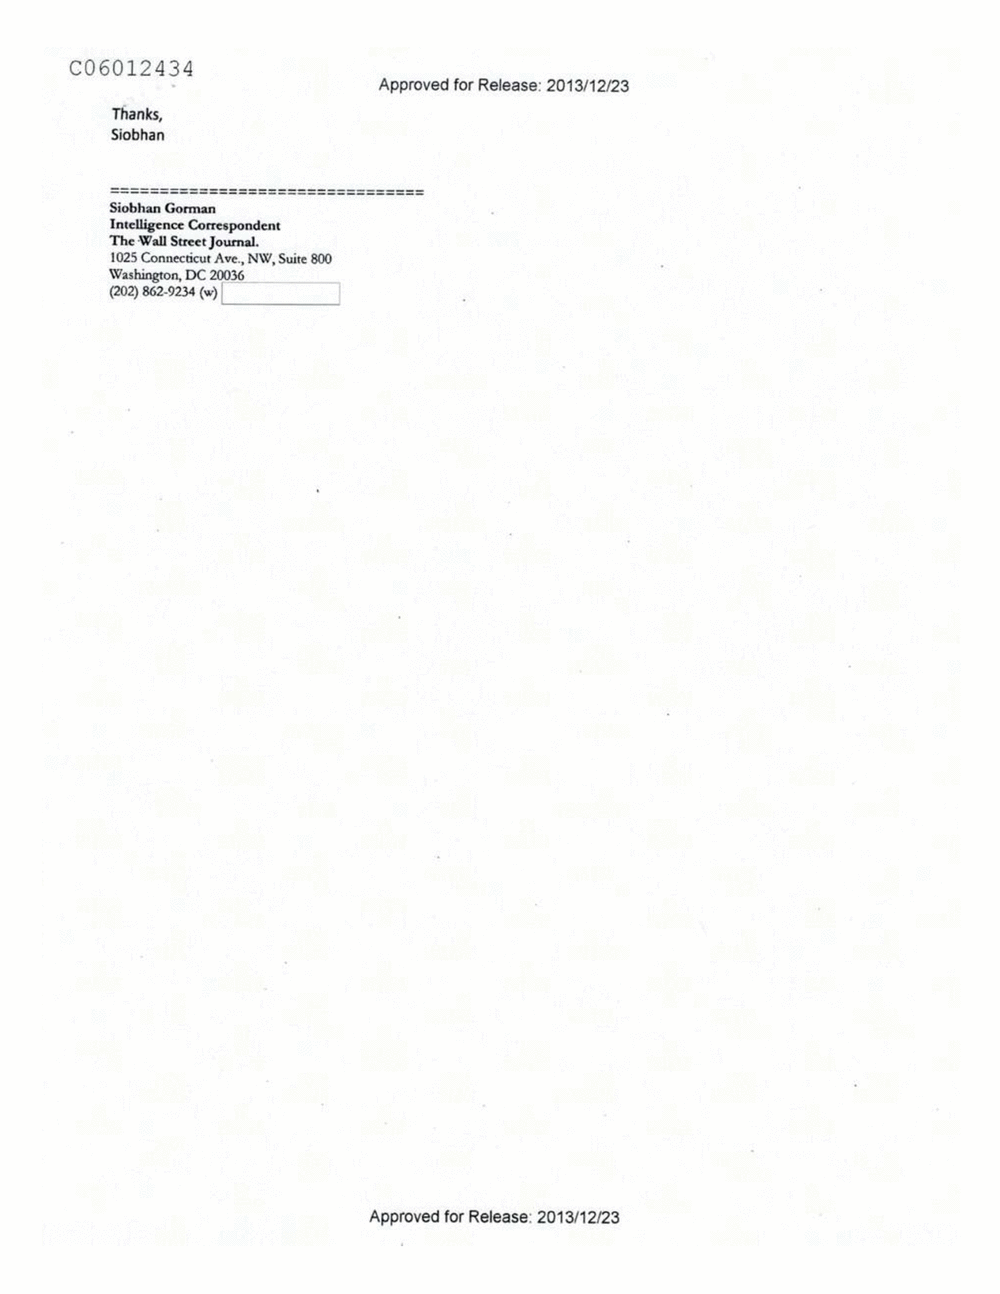 Page 14 from Email Correspondence Between Reporters and CIA Flacks